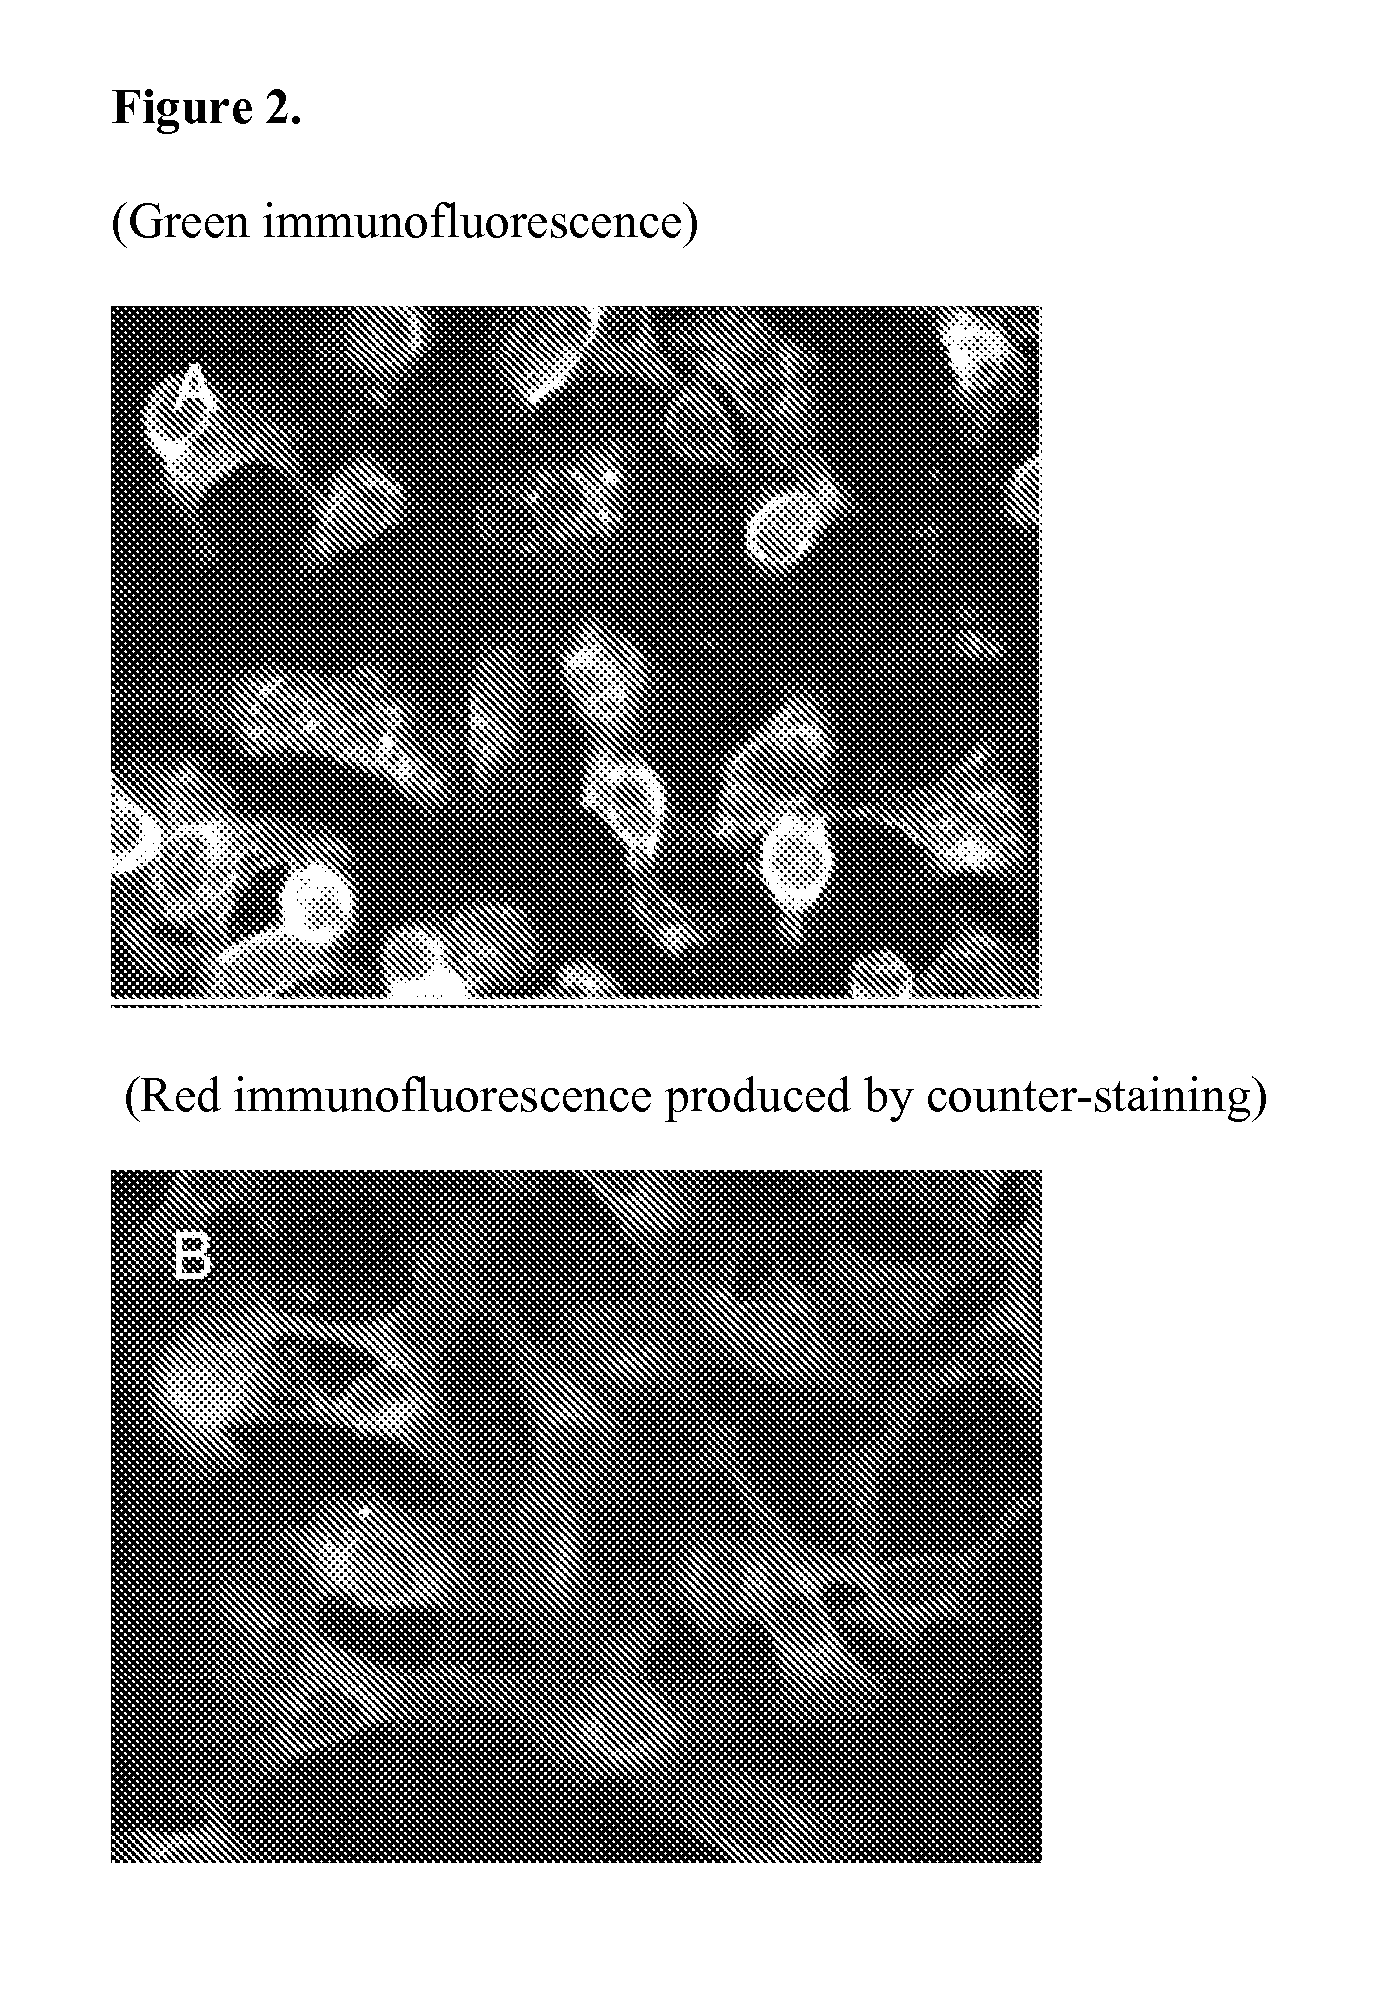 Novel Pneumovirus Compositions and Methods For Using the Same